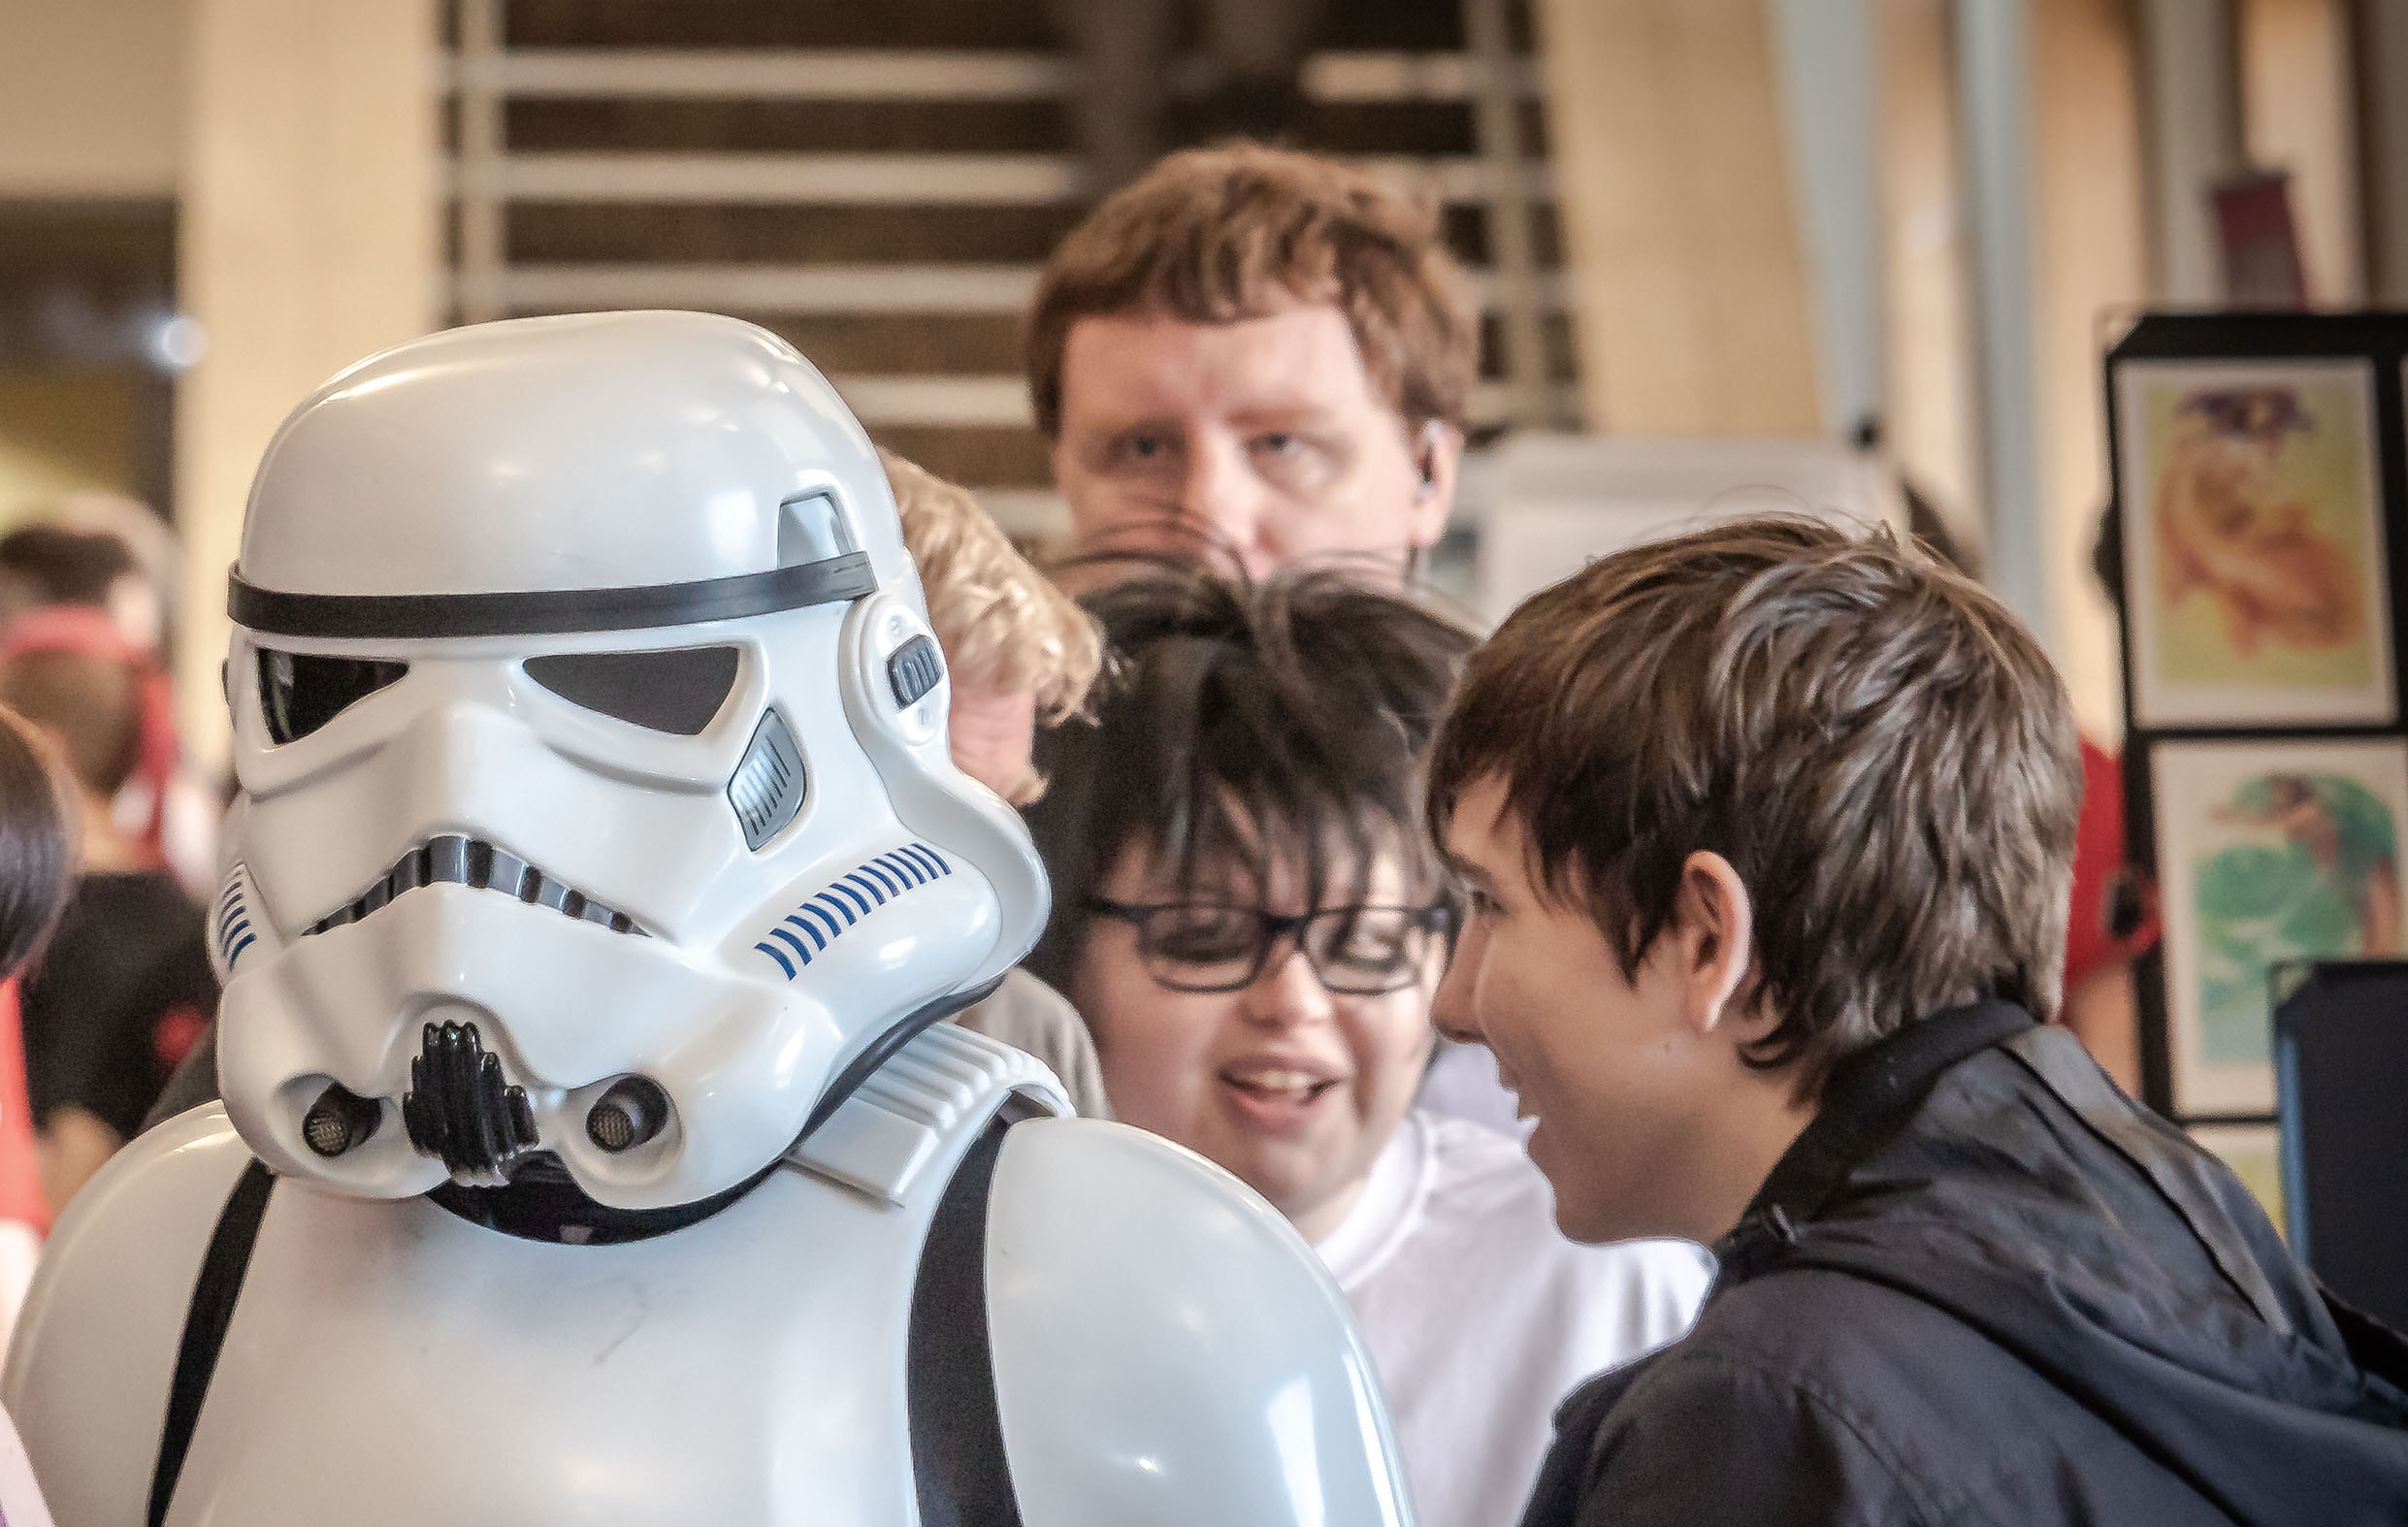 Stormtrooper: There will be talks, workshops and merchandise up for sale.